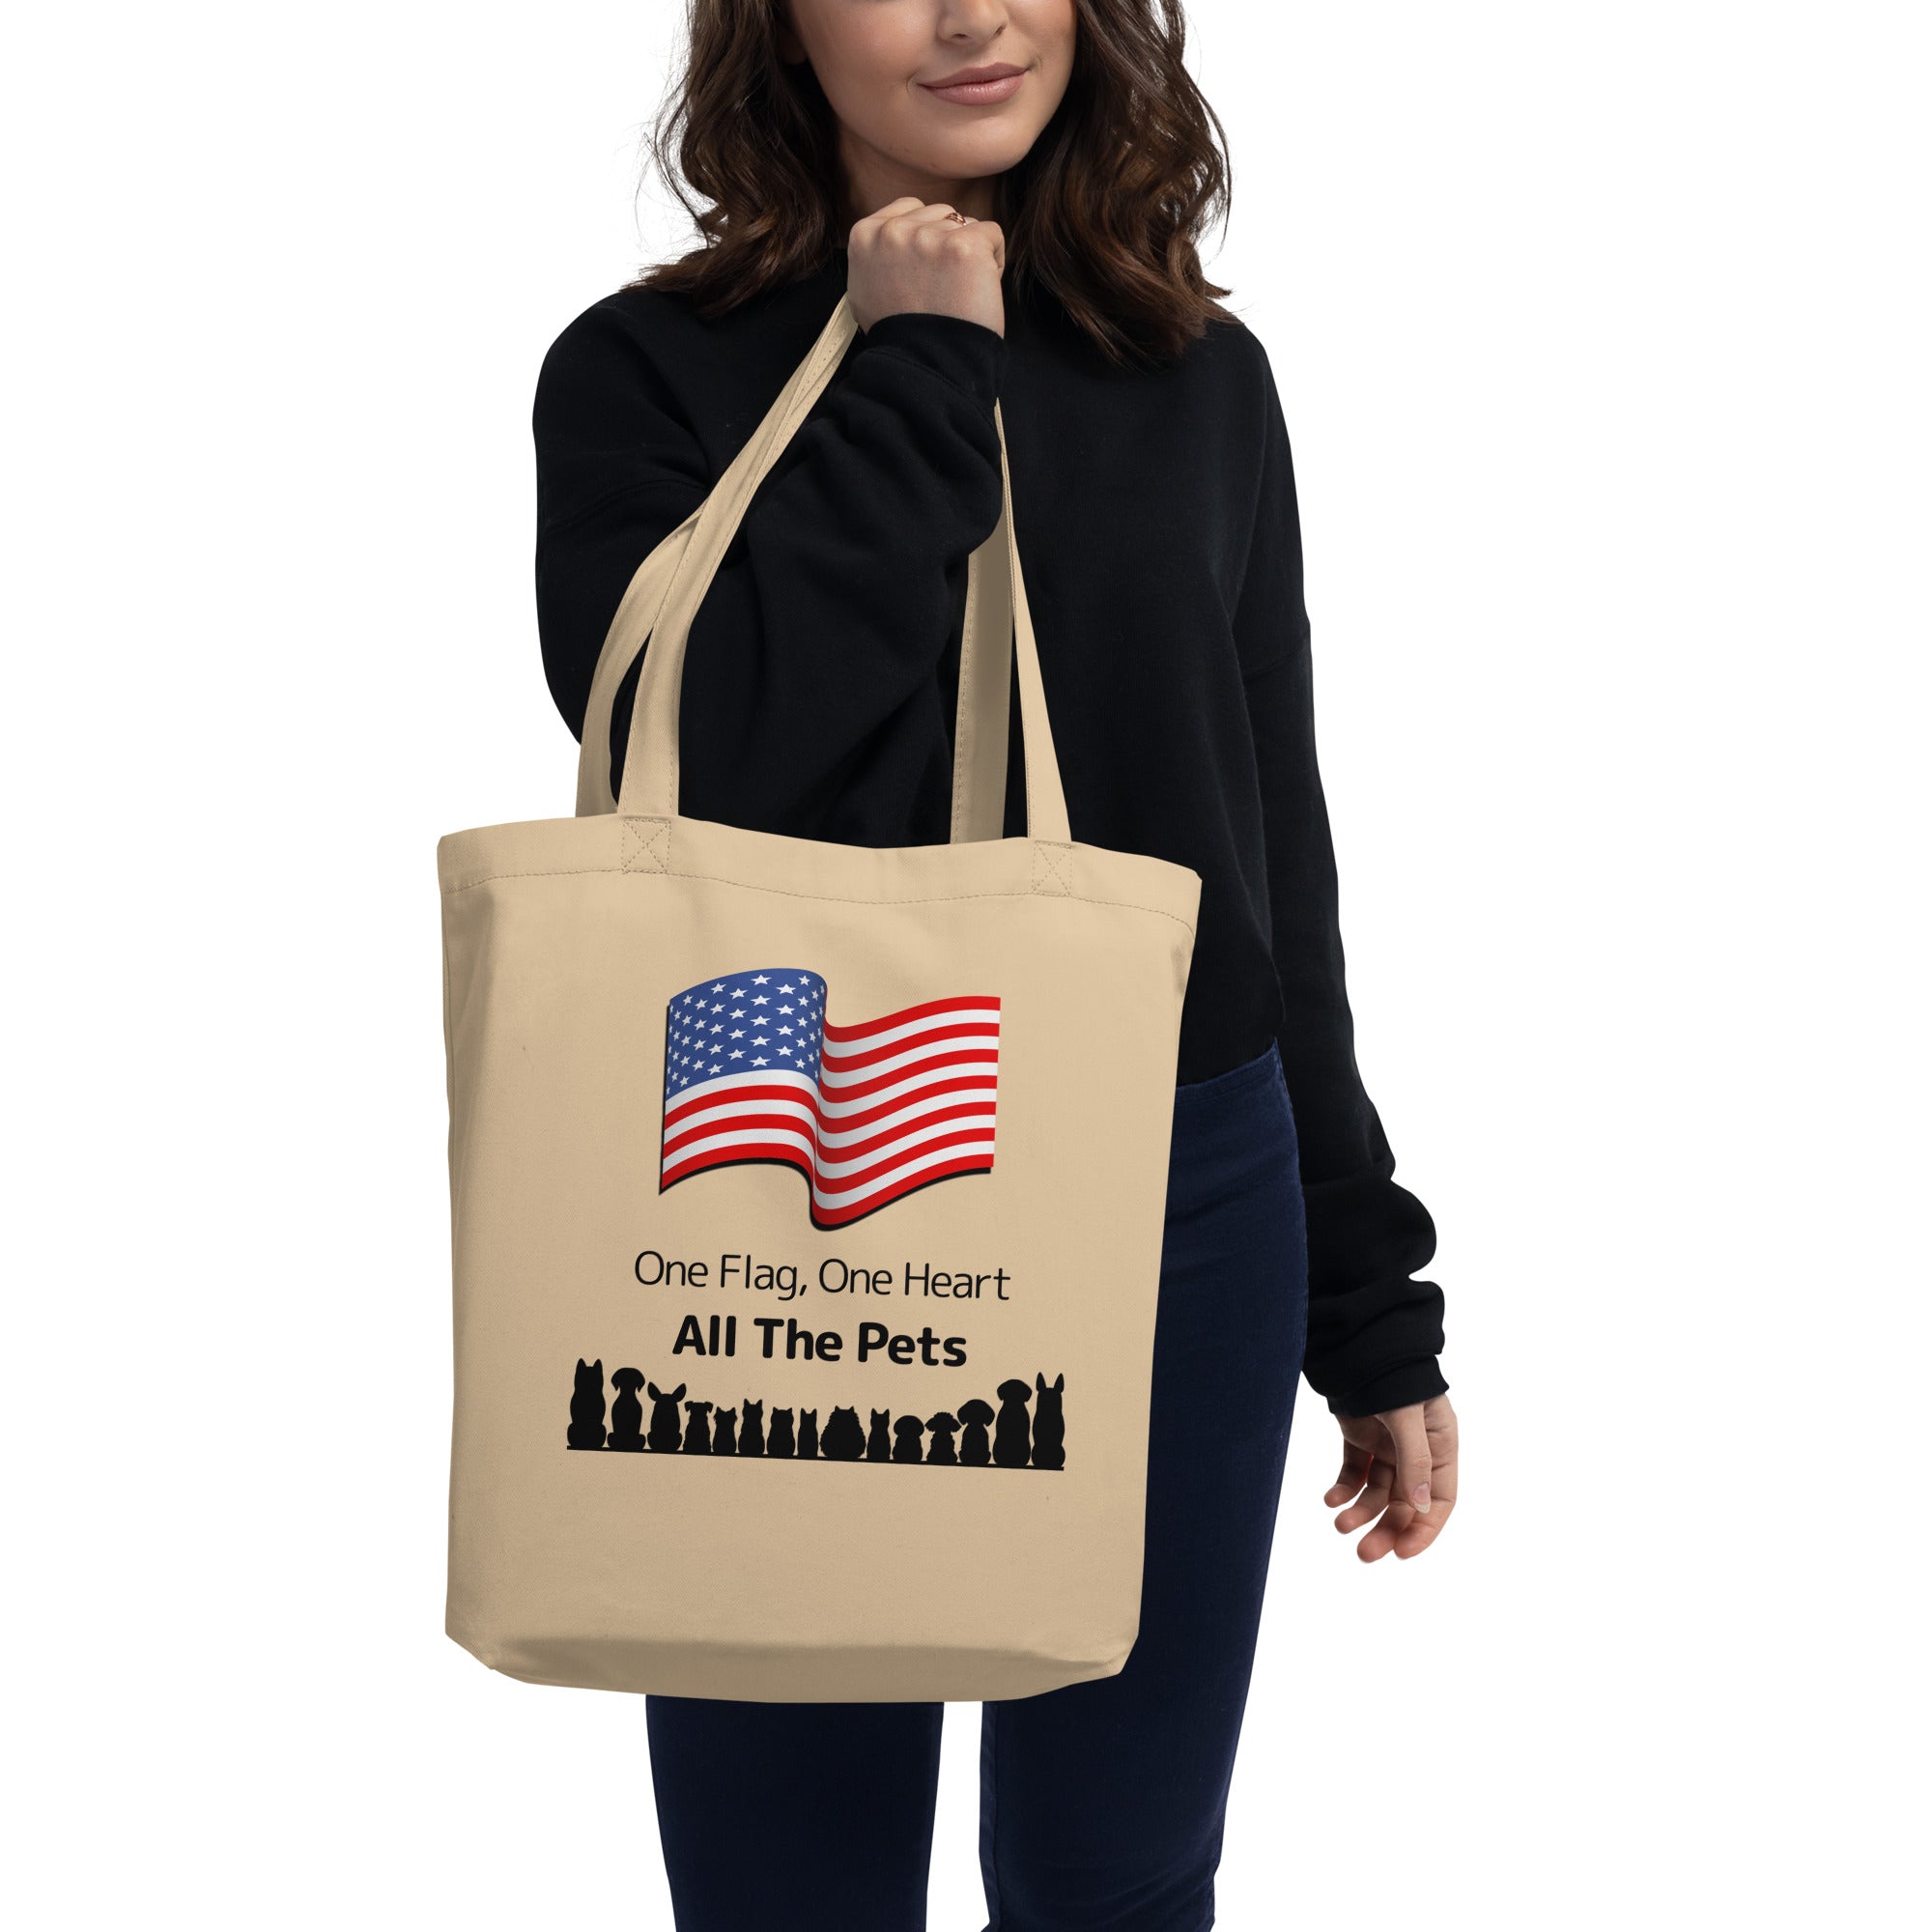 One Flag, One Heart, All the Pets Eco Tote Bag